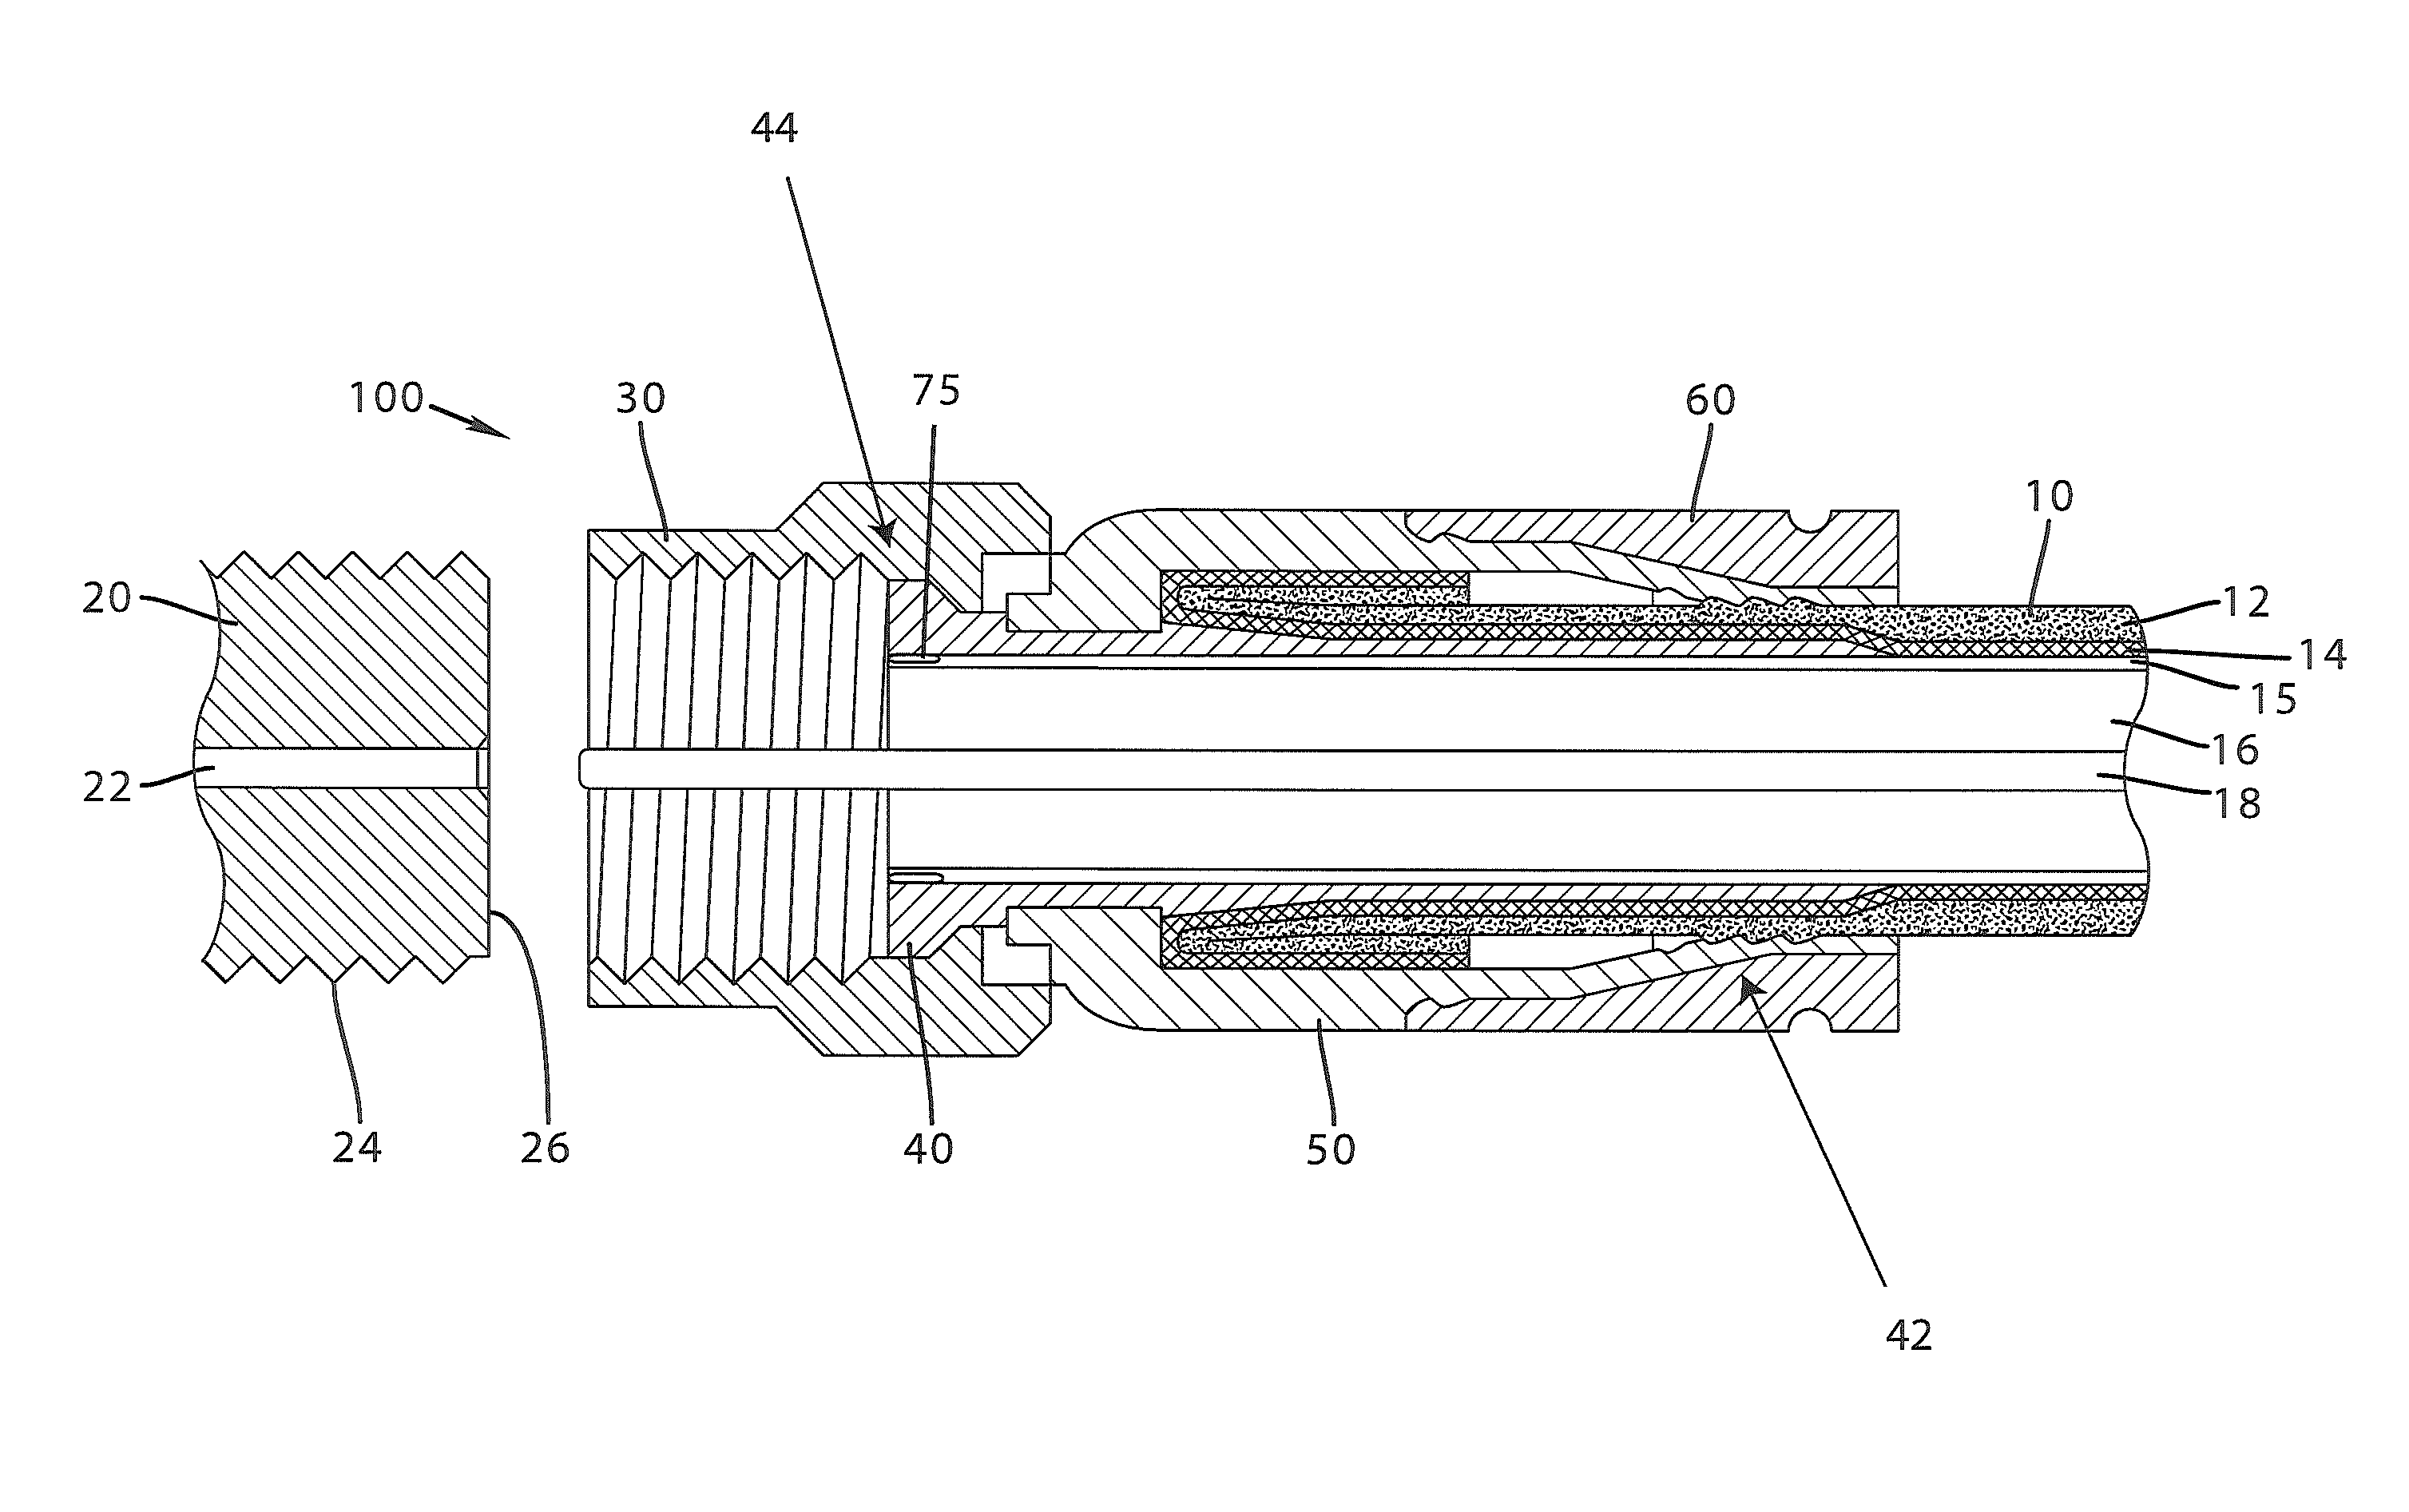 Dielectric sealing member and method of use thereof